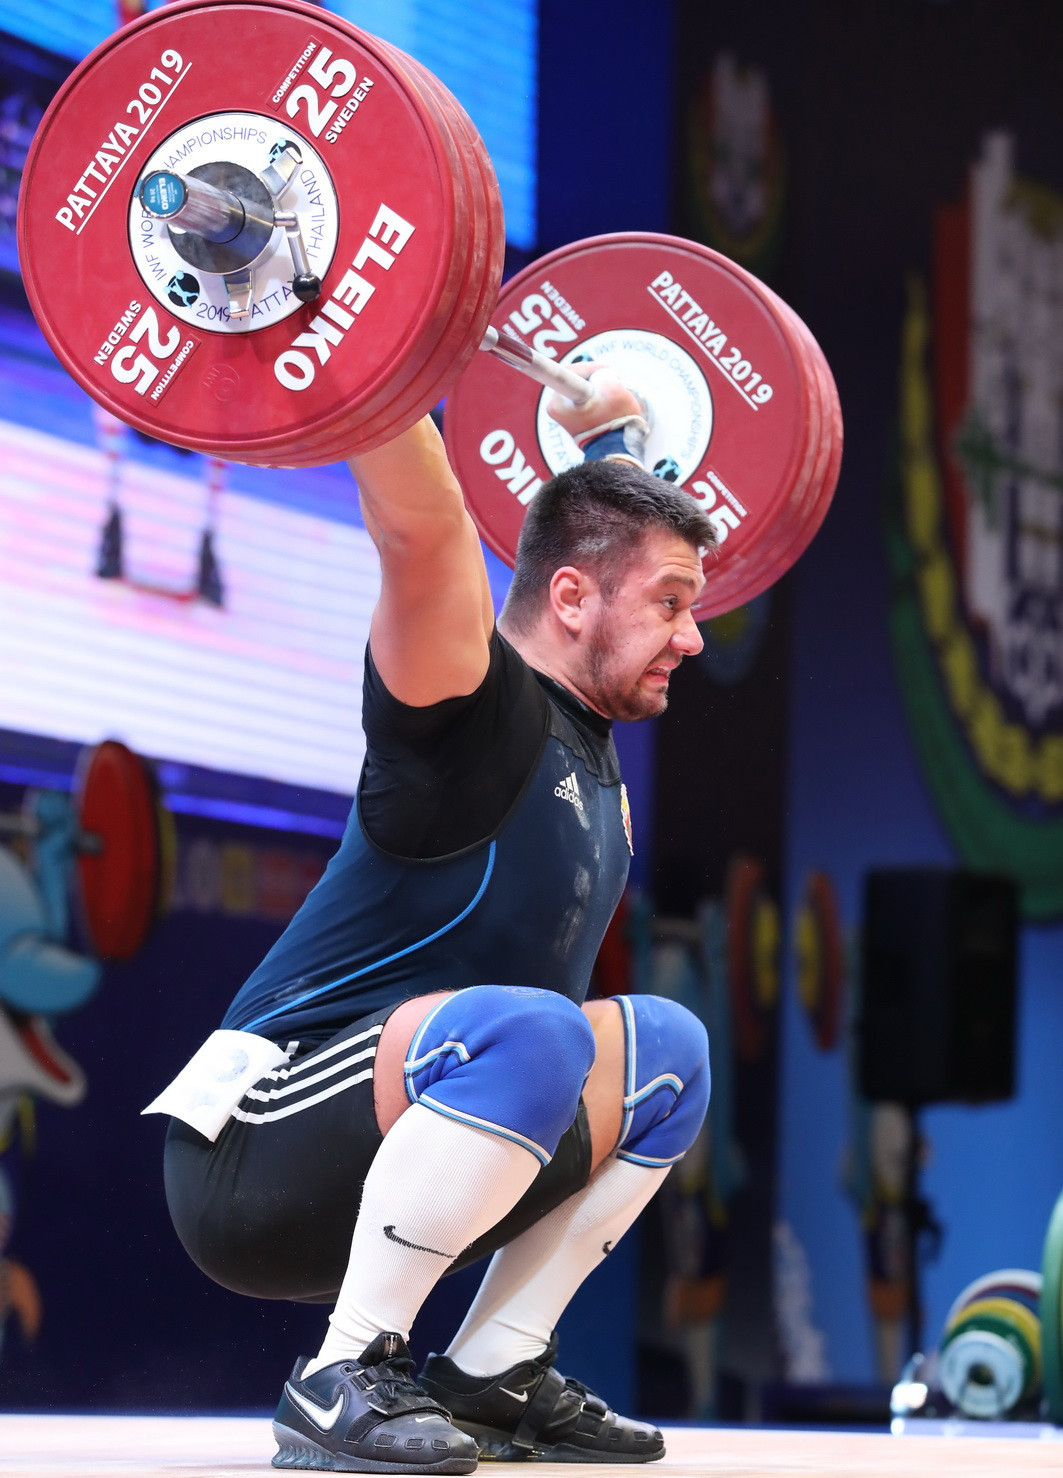 Belarus' Yauheni Tsikhantsou prevailed in a highly-competitive men's 102kg event ©IWF